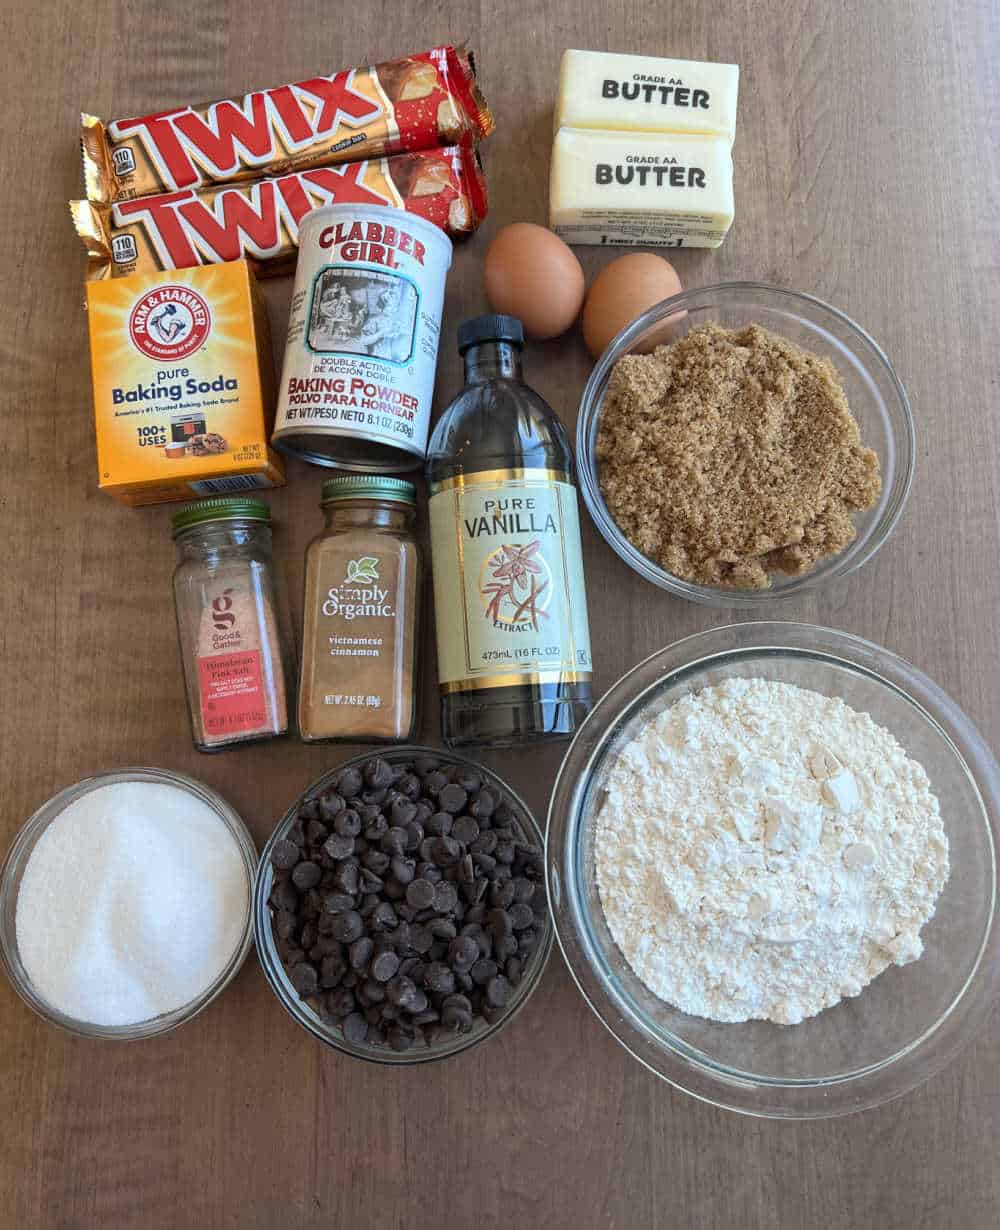 Twix candy bars and ingredients for Twix cookies.